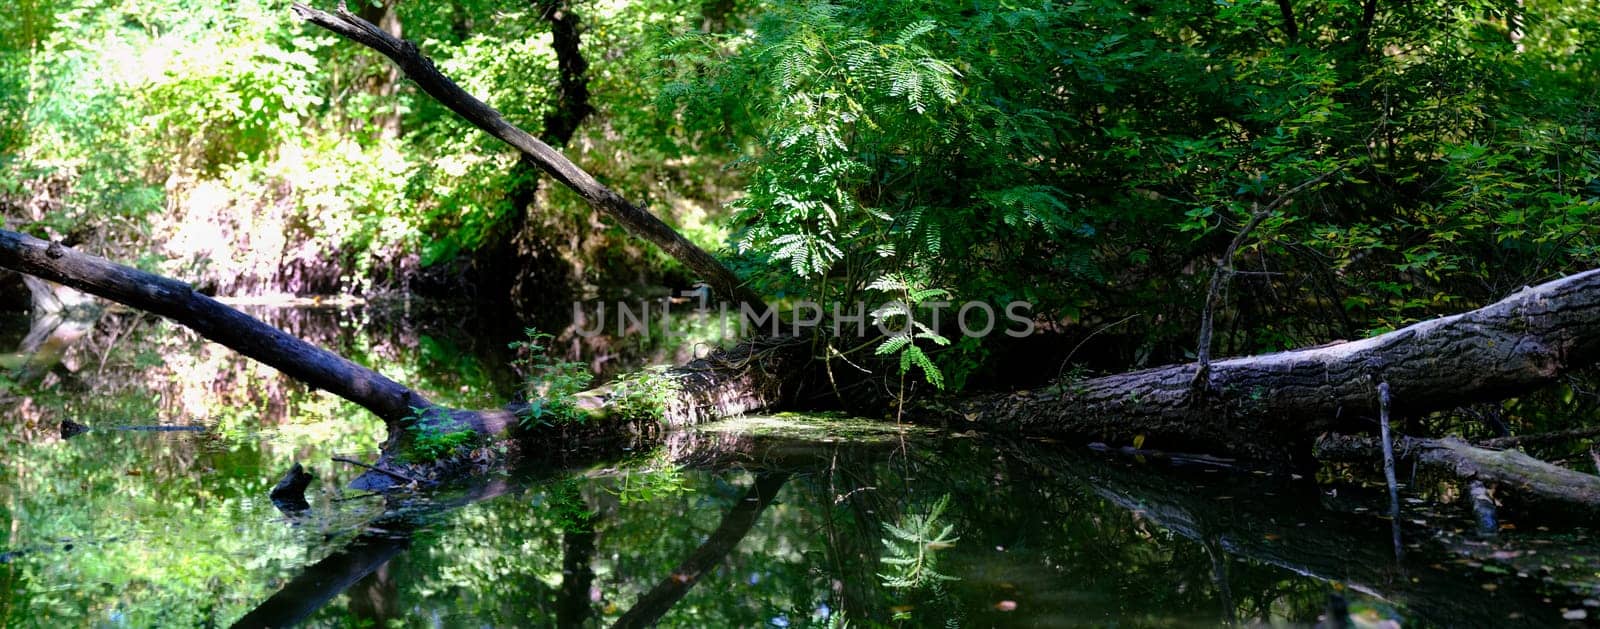 Panorama spring green forest with falling tree reflection trees in river by igor010